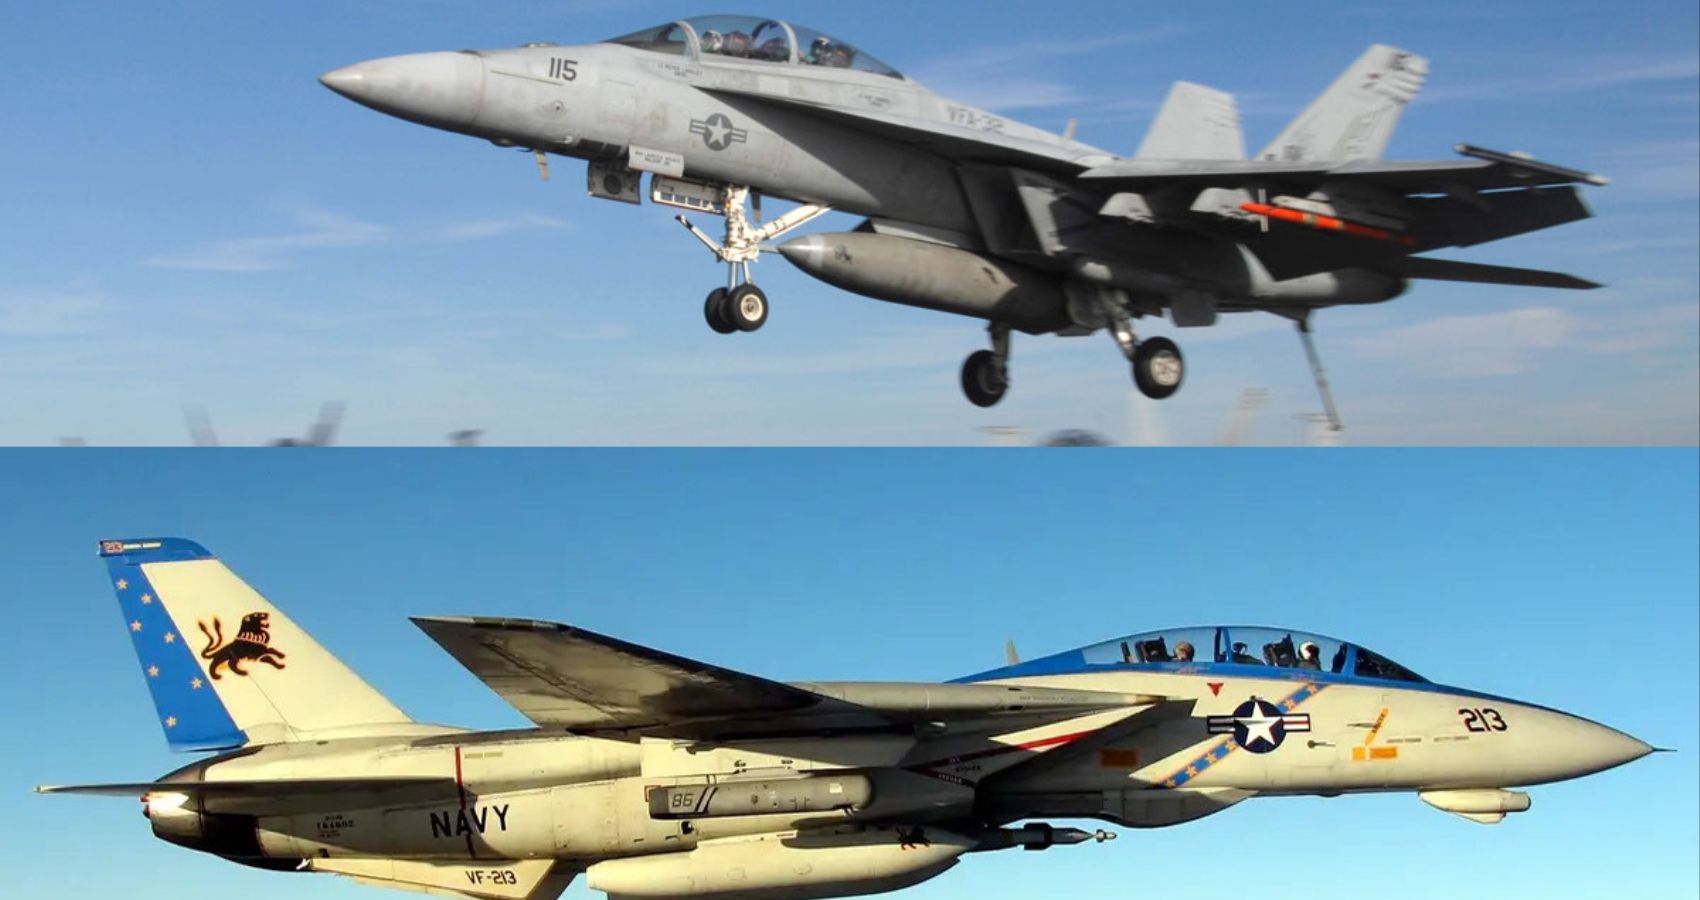 How The F-14 vs F/A-18 Super Hornet Stars From Top Gun Compare